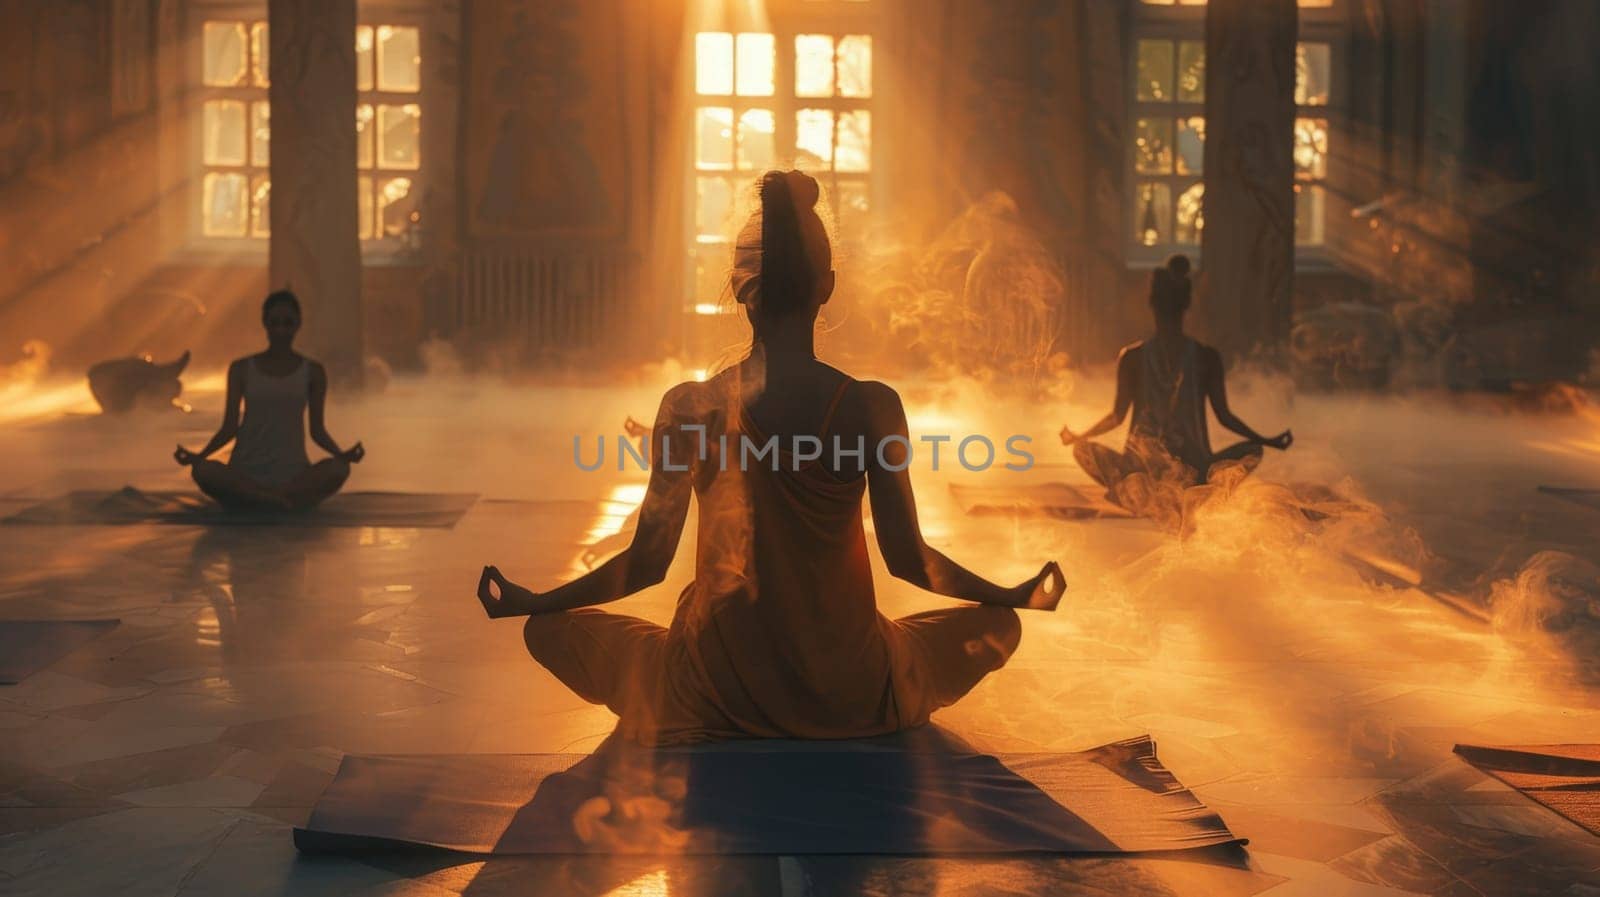 A group of young girls practicing yoga in the sunlight perform Padmasana exercises, lotus position by Lobachad